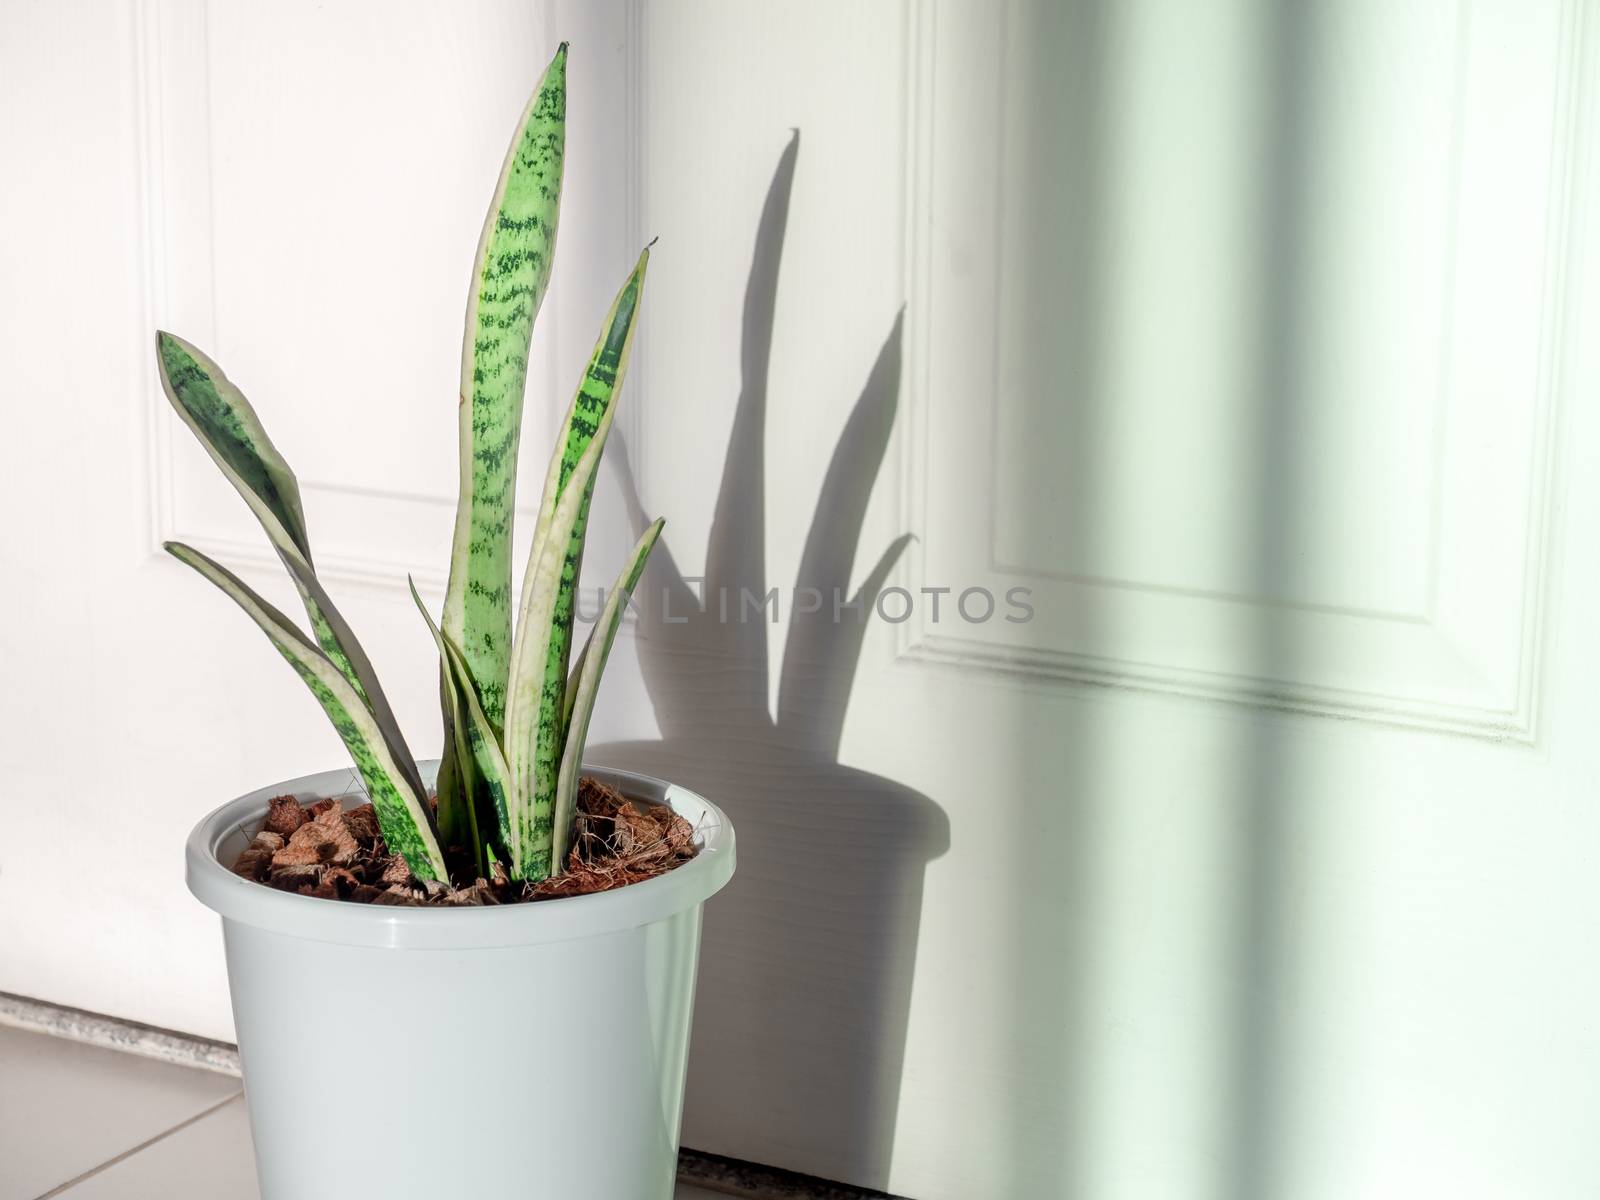 Green leaf, air purifying plants in white plastic pot on tiles floor in the room with copy space.